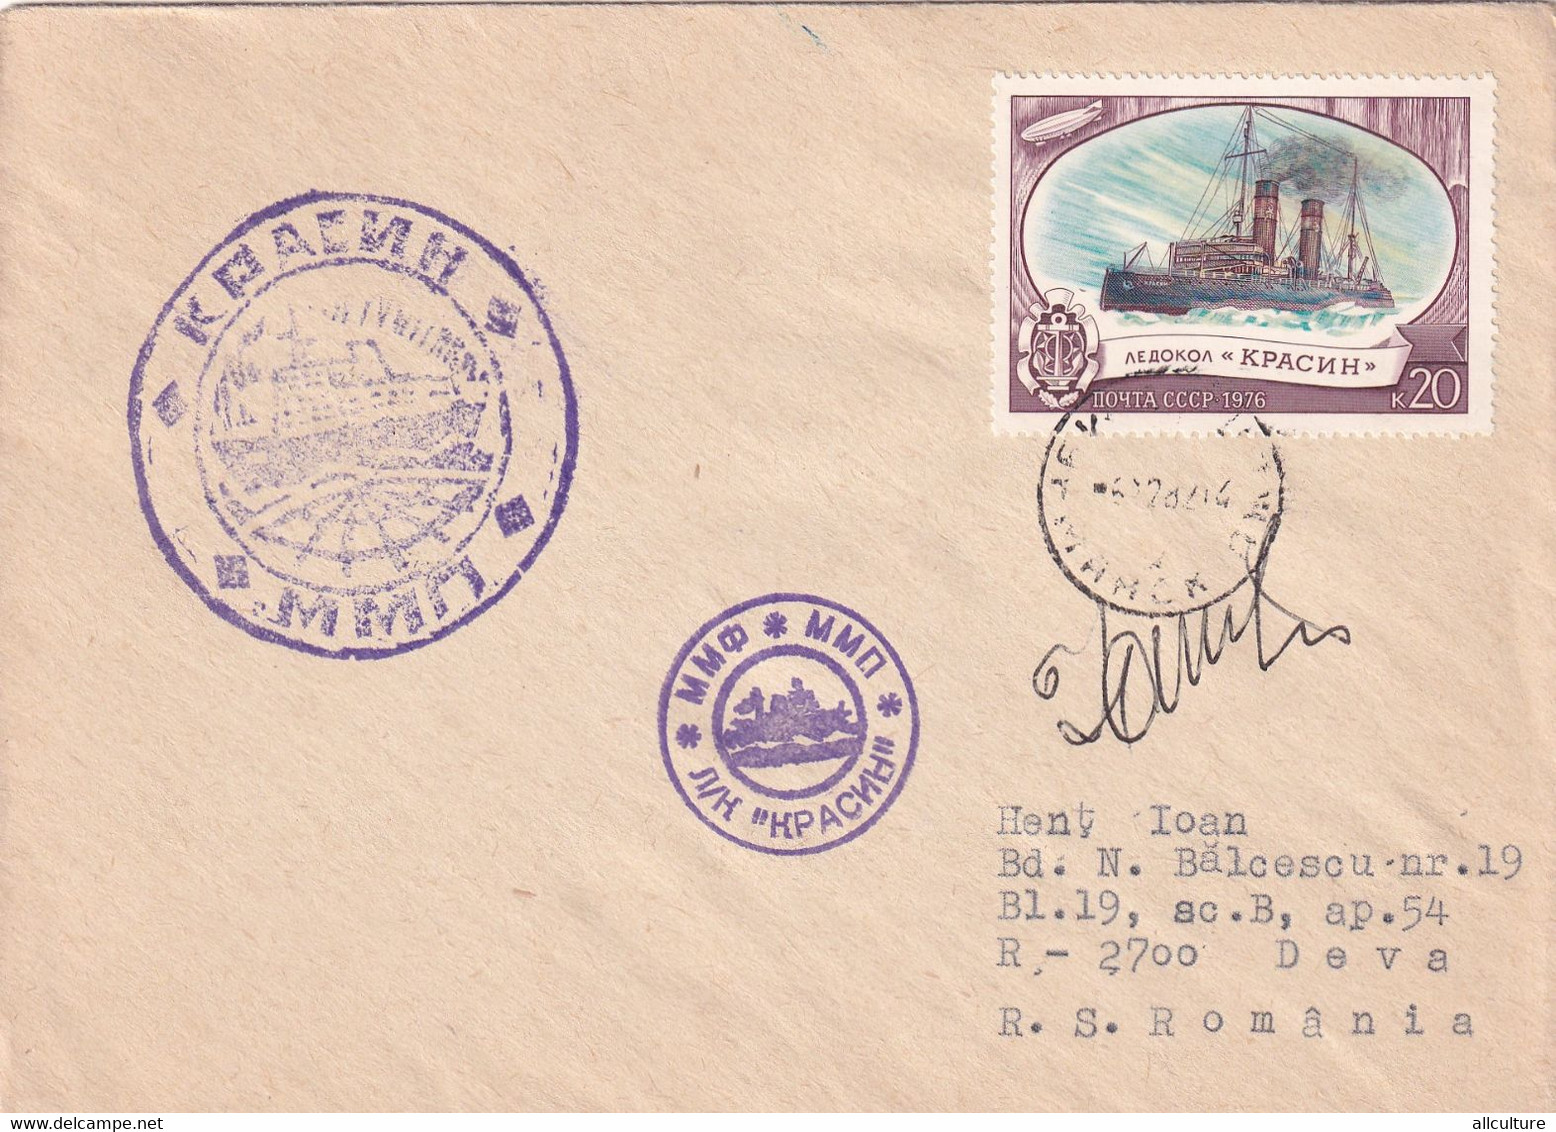 A8139- KRASIN ICEBREAKER SHIP, 1976 USSR MAIL USED STAMP ON COVER SENT TO DEVA ROMANIA - Navires & Brise-glace